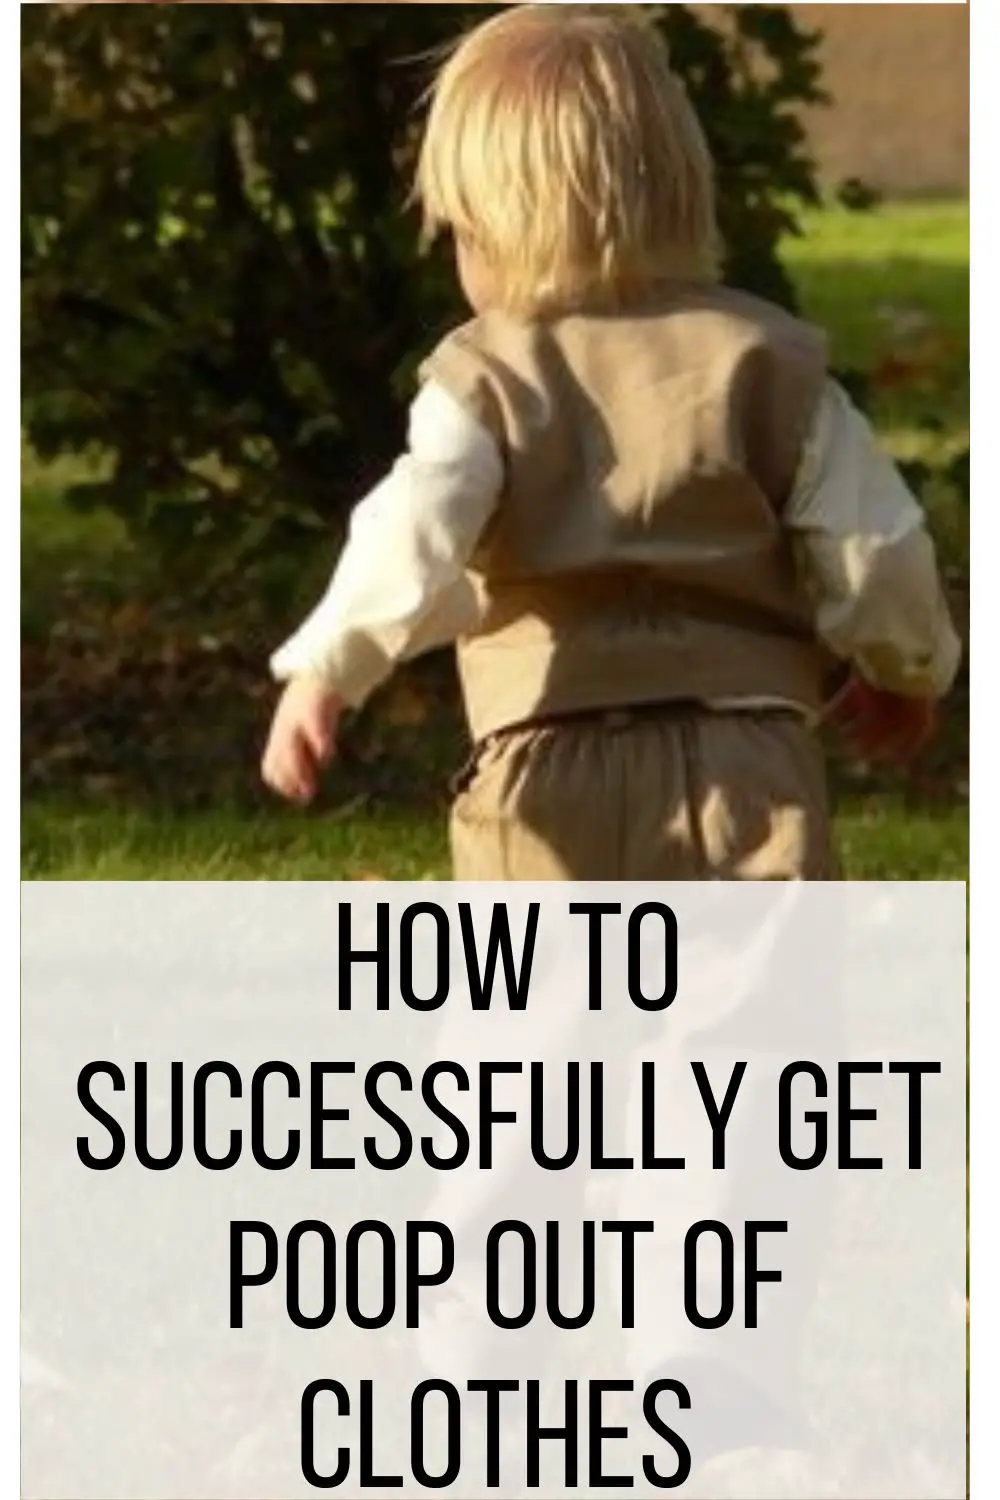 How to Successfully Get Poop Out of Clothes